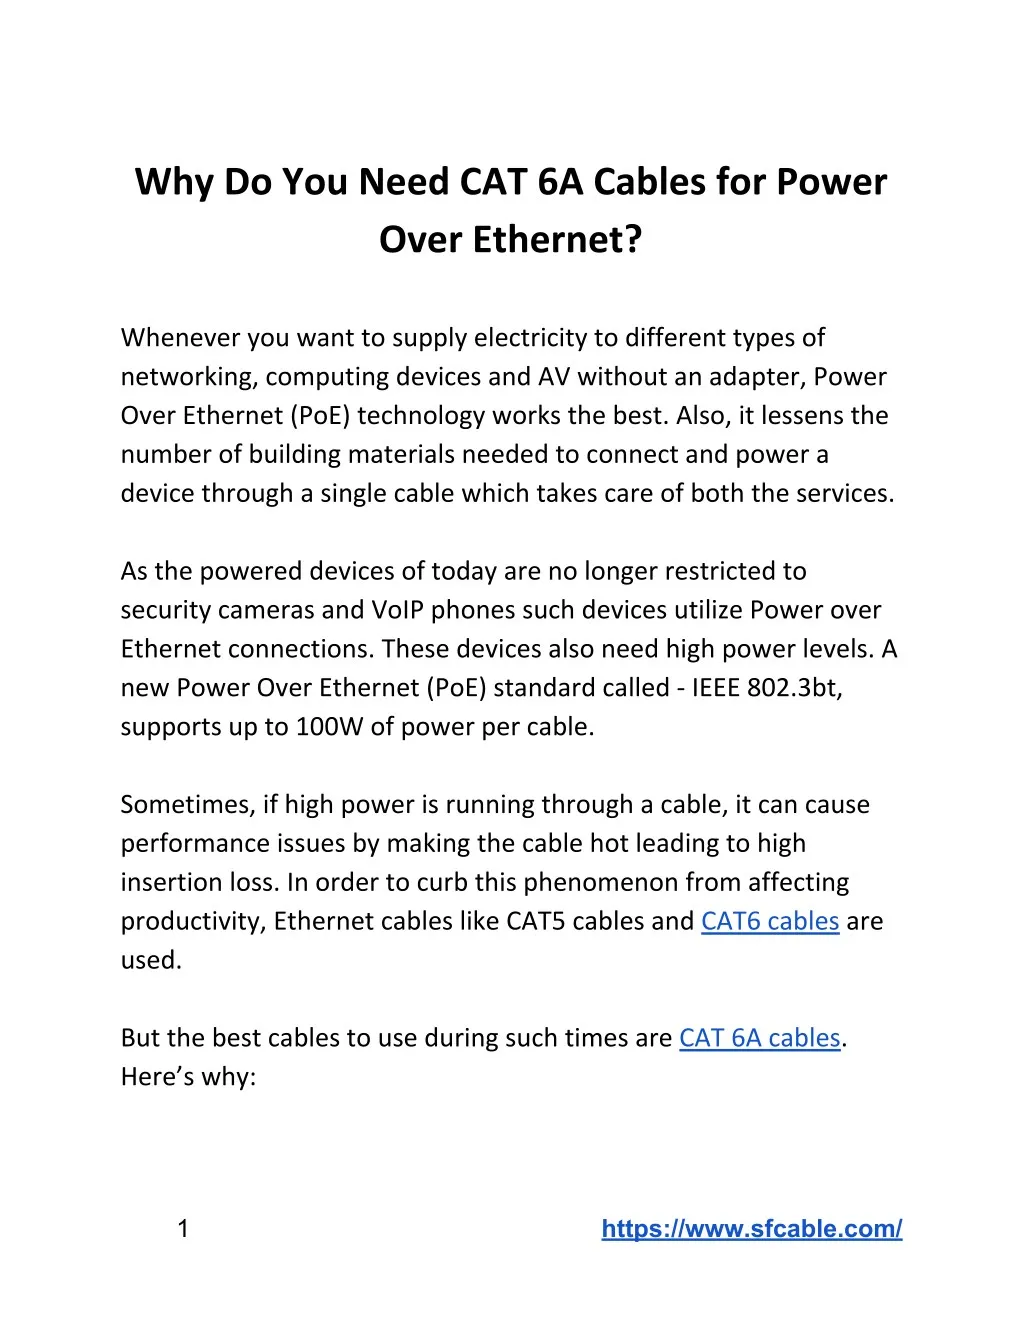 why do you need cat 6a cables for power over